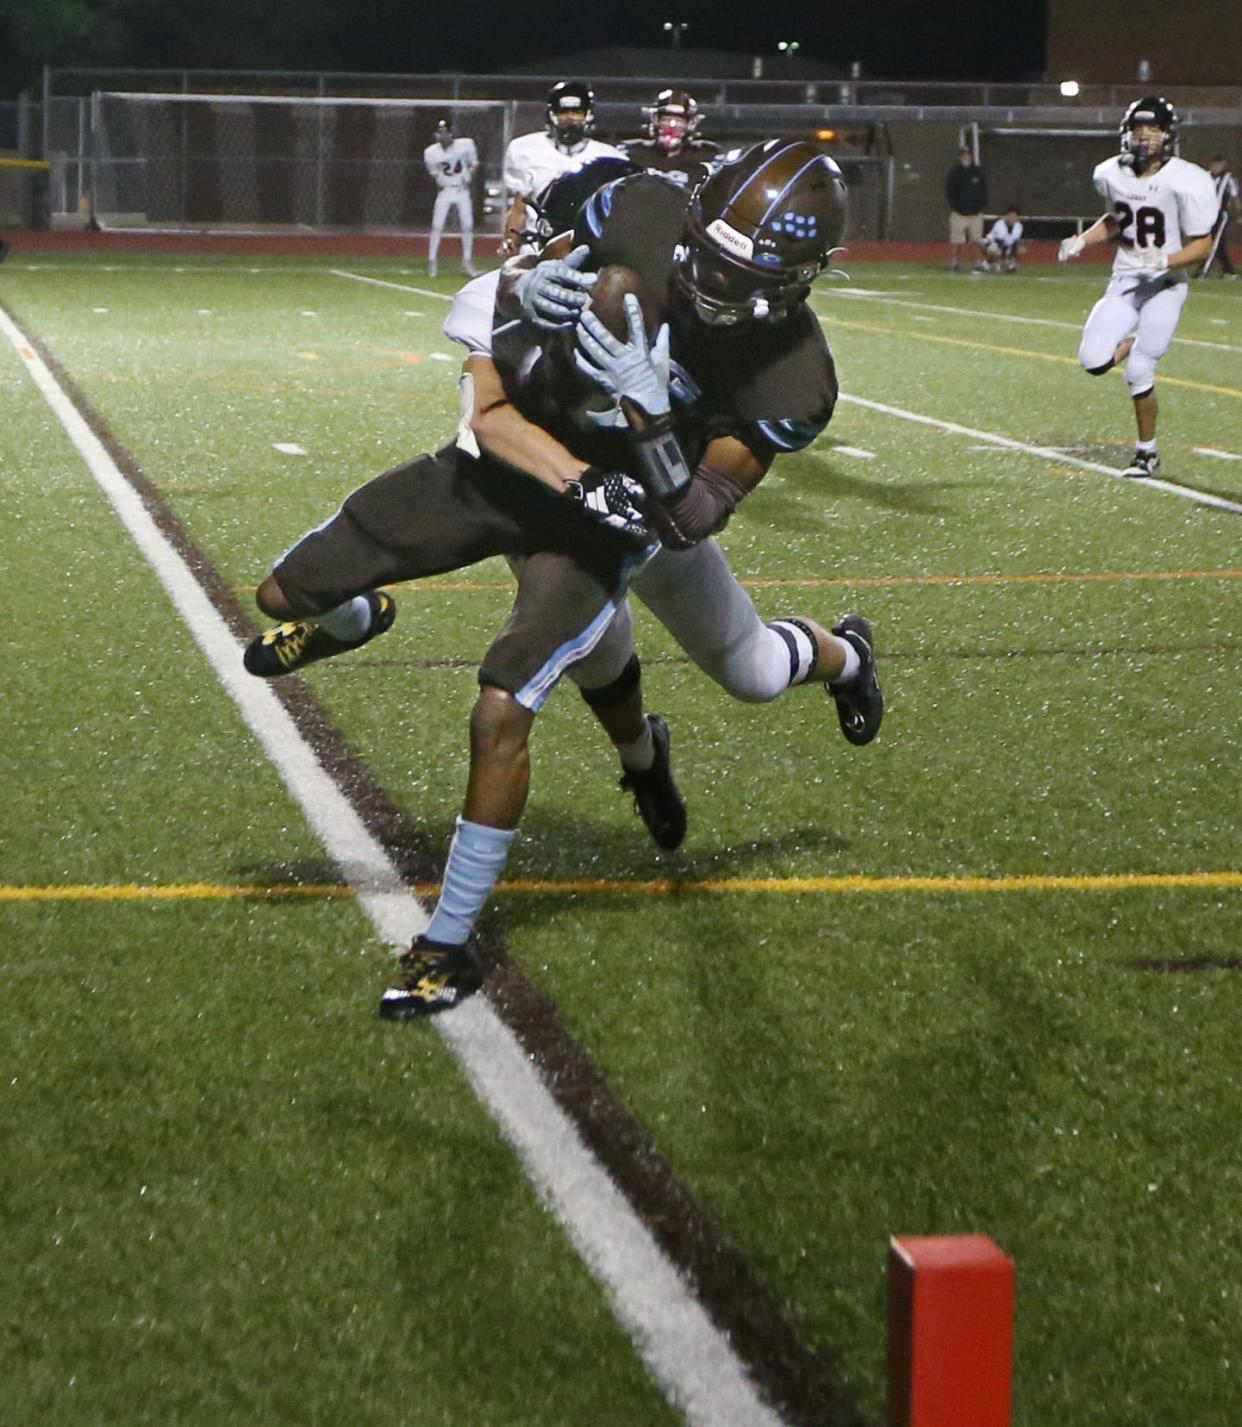 ER/Gananda wide receiver Miles Caviness pulls in the touchdown reception and drags LeRoy's Andrew Strollo into the end zone on the play.